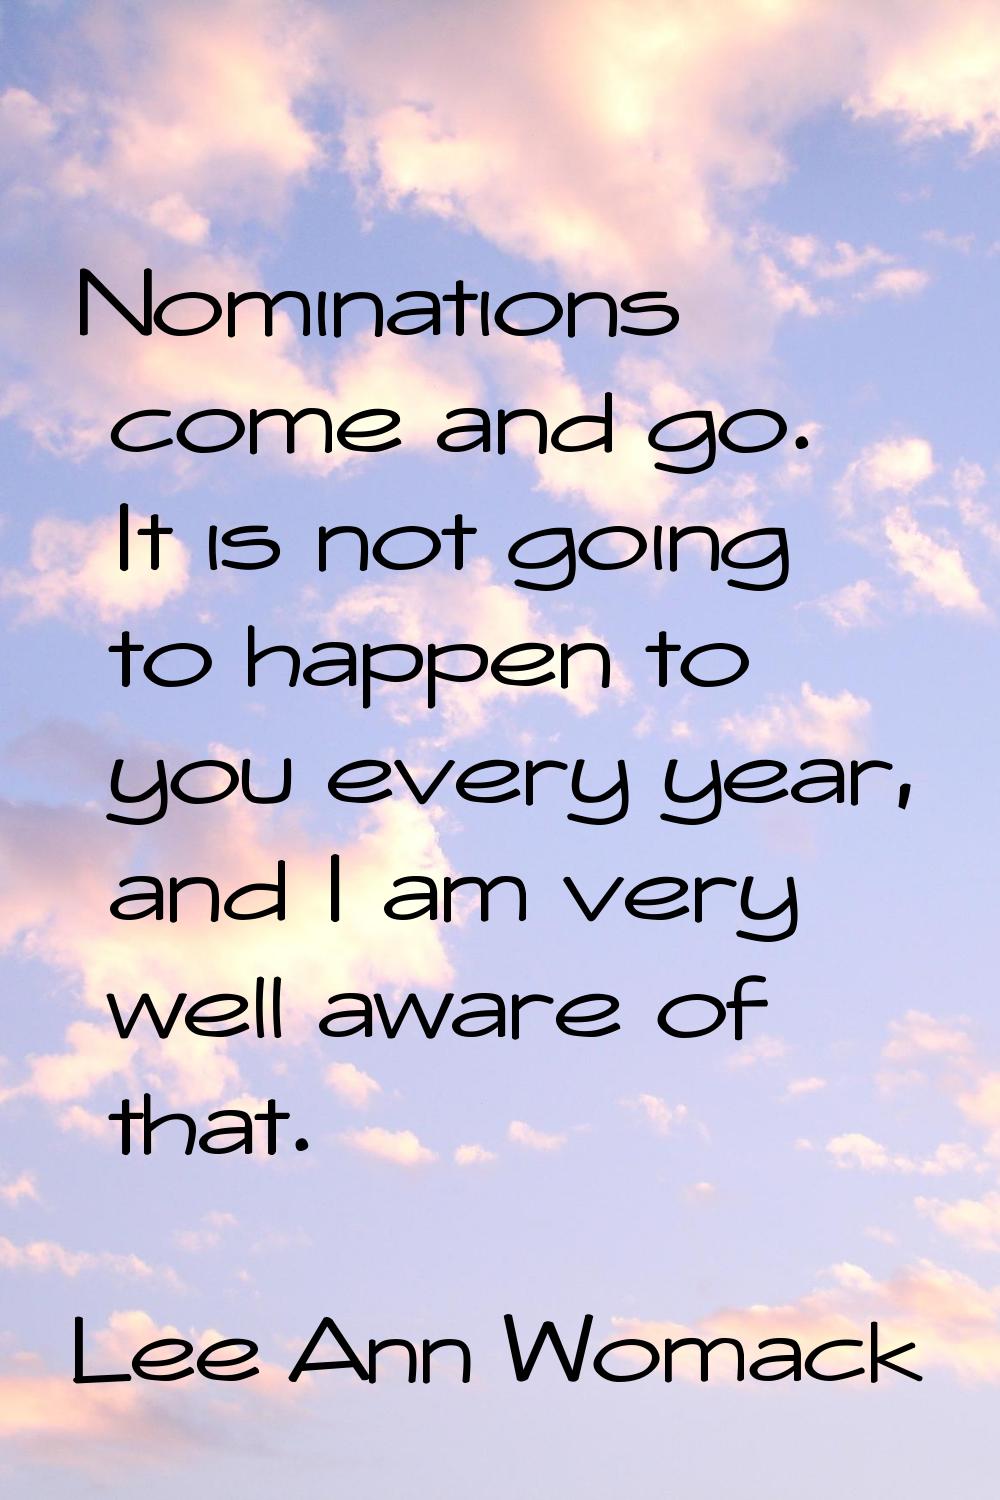 Nominations come and go. It is not going to happen to you every year, and I am very well aware of t